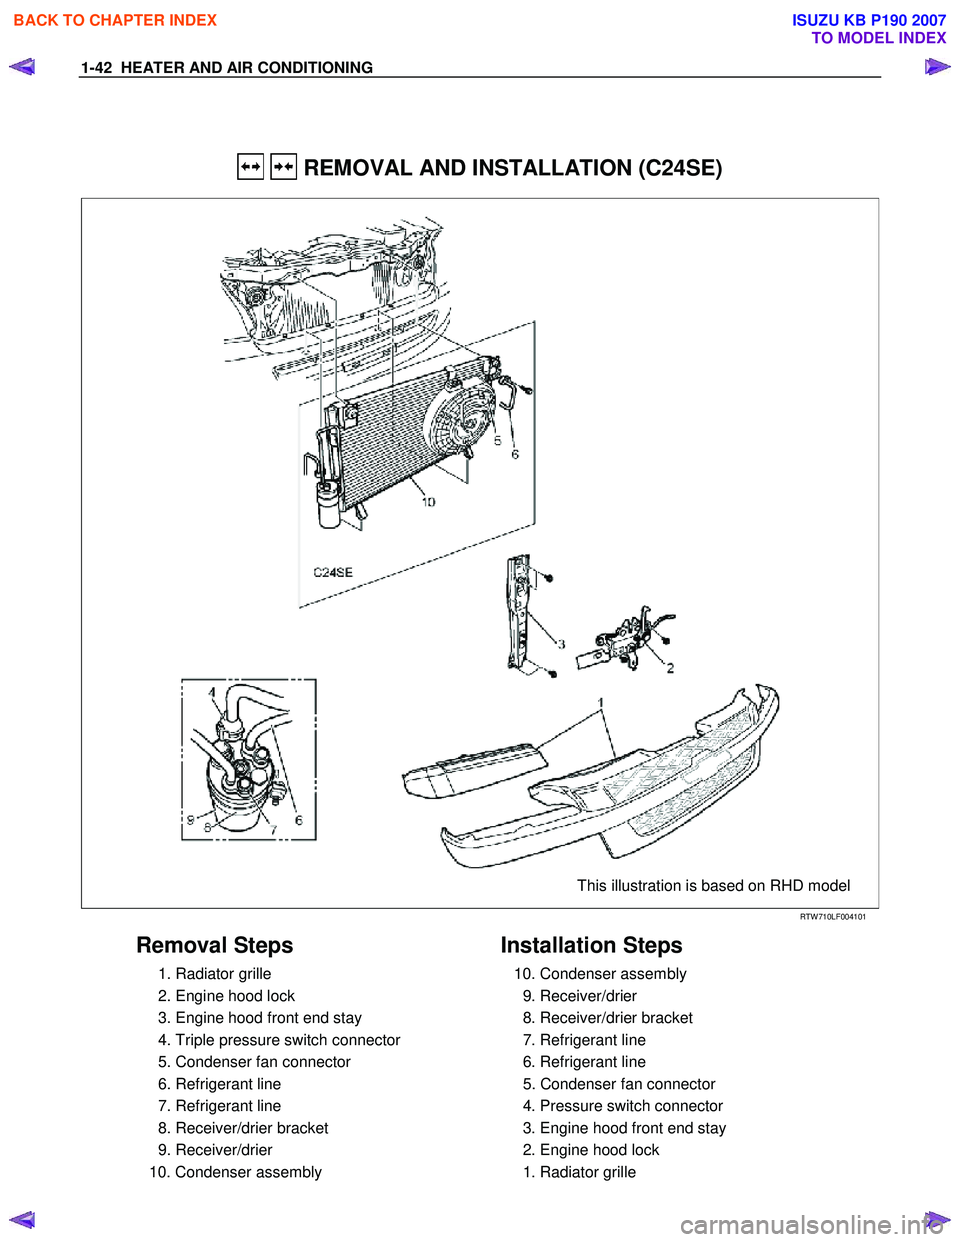 ISUZU KB P190 2007  Workshop Repair Manual 1-42  HEATER AND AIR CONDITIONING 
 
  REMOVAL AND INSTALLATION (C24SE) 
  
 
 
 
This illustration is based on RHD model
 
 
RTW 710LF004101 
 
Removal Steps   
  1. Radiator grille  
  2. Engine hoo